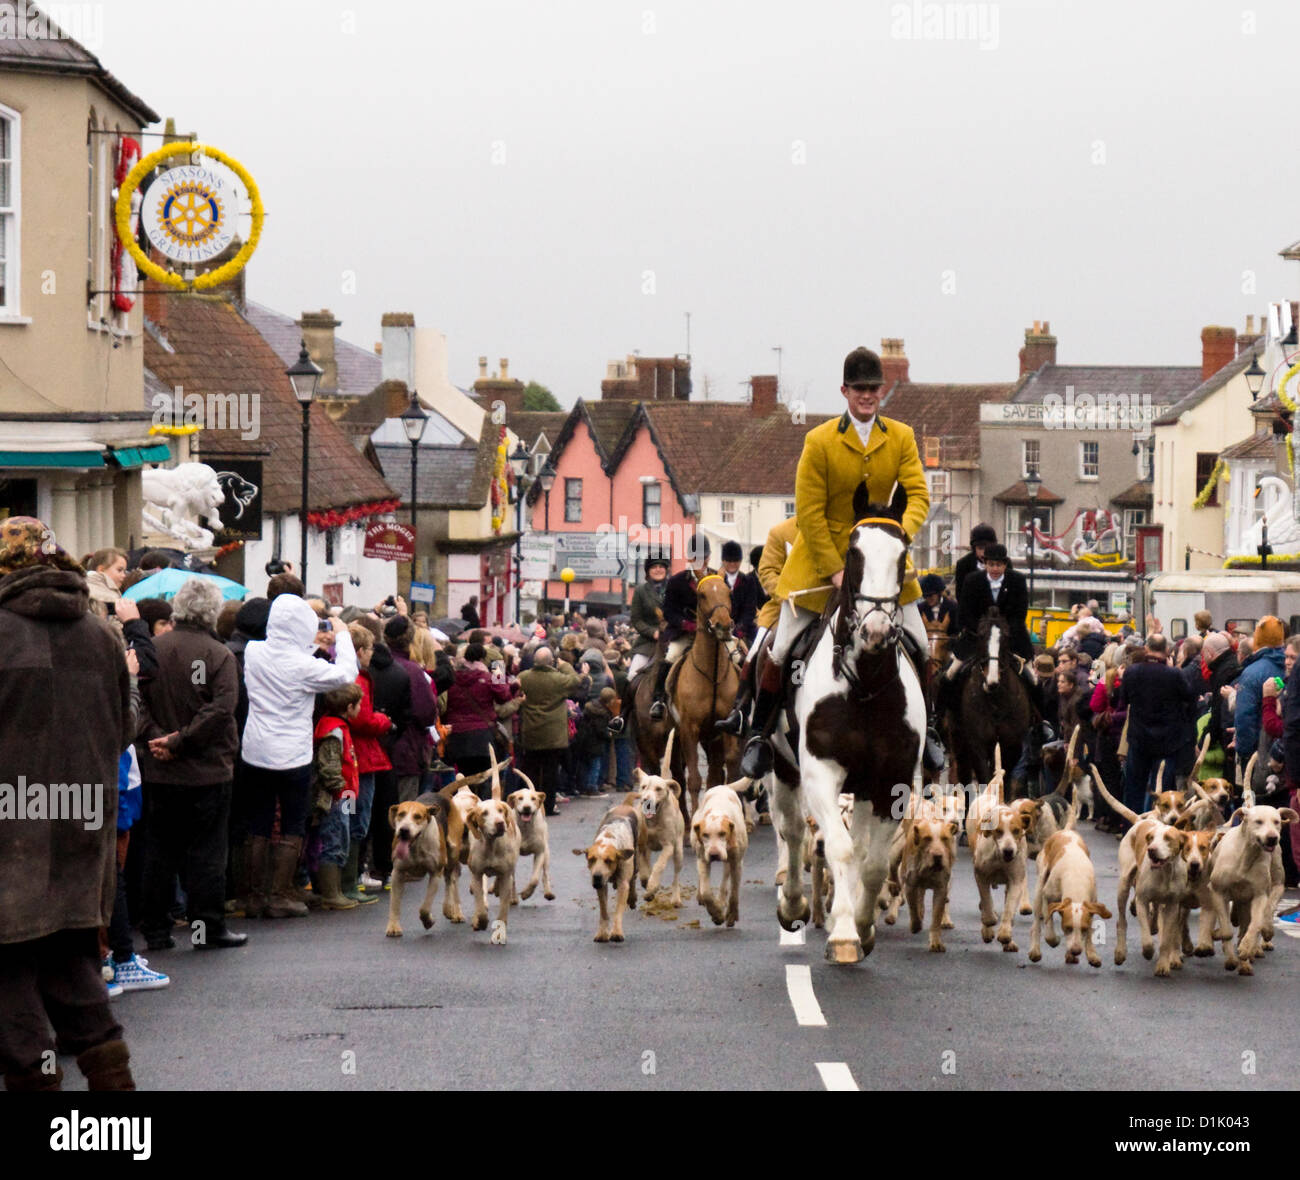 On Boxing Day, 26th December 2012 the Berkeley Hunt ride through the center of Thornbury town in Gloucestershire. Many members of the public turned out in cold weather to support this festive event. Credit:  JMF News / Alamy Live News Stock Photo